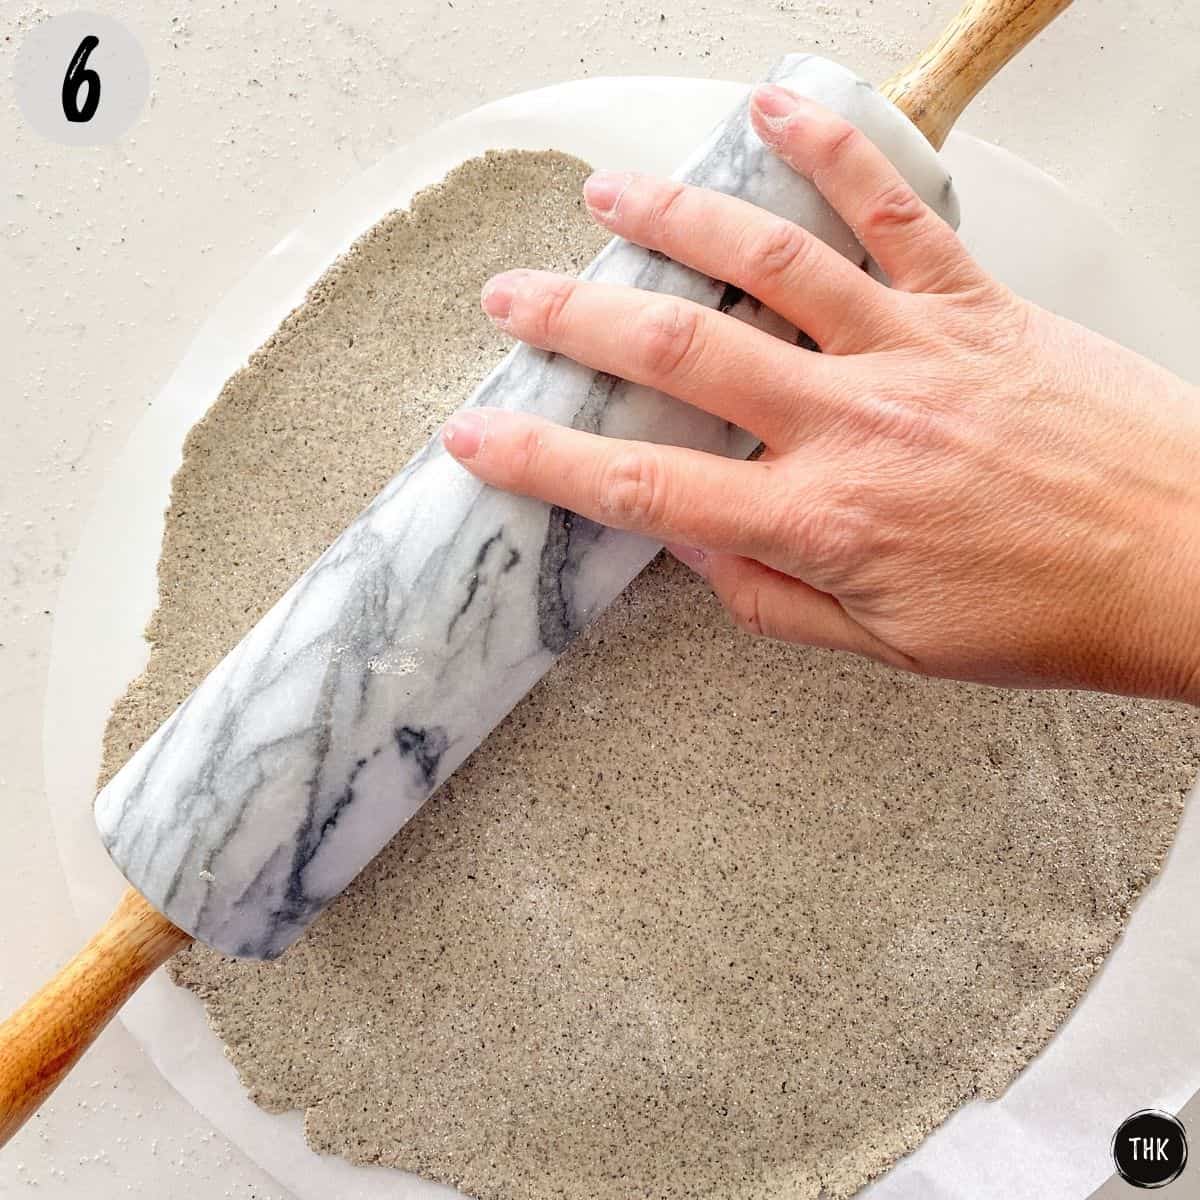 Hand using rolling pin to stretch pizza dough.